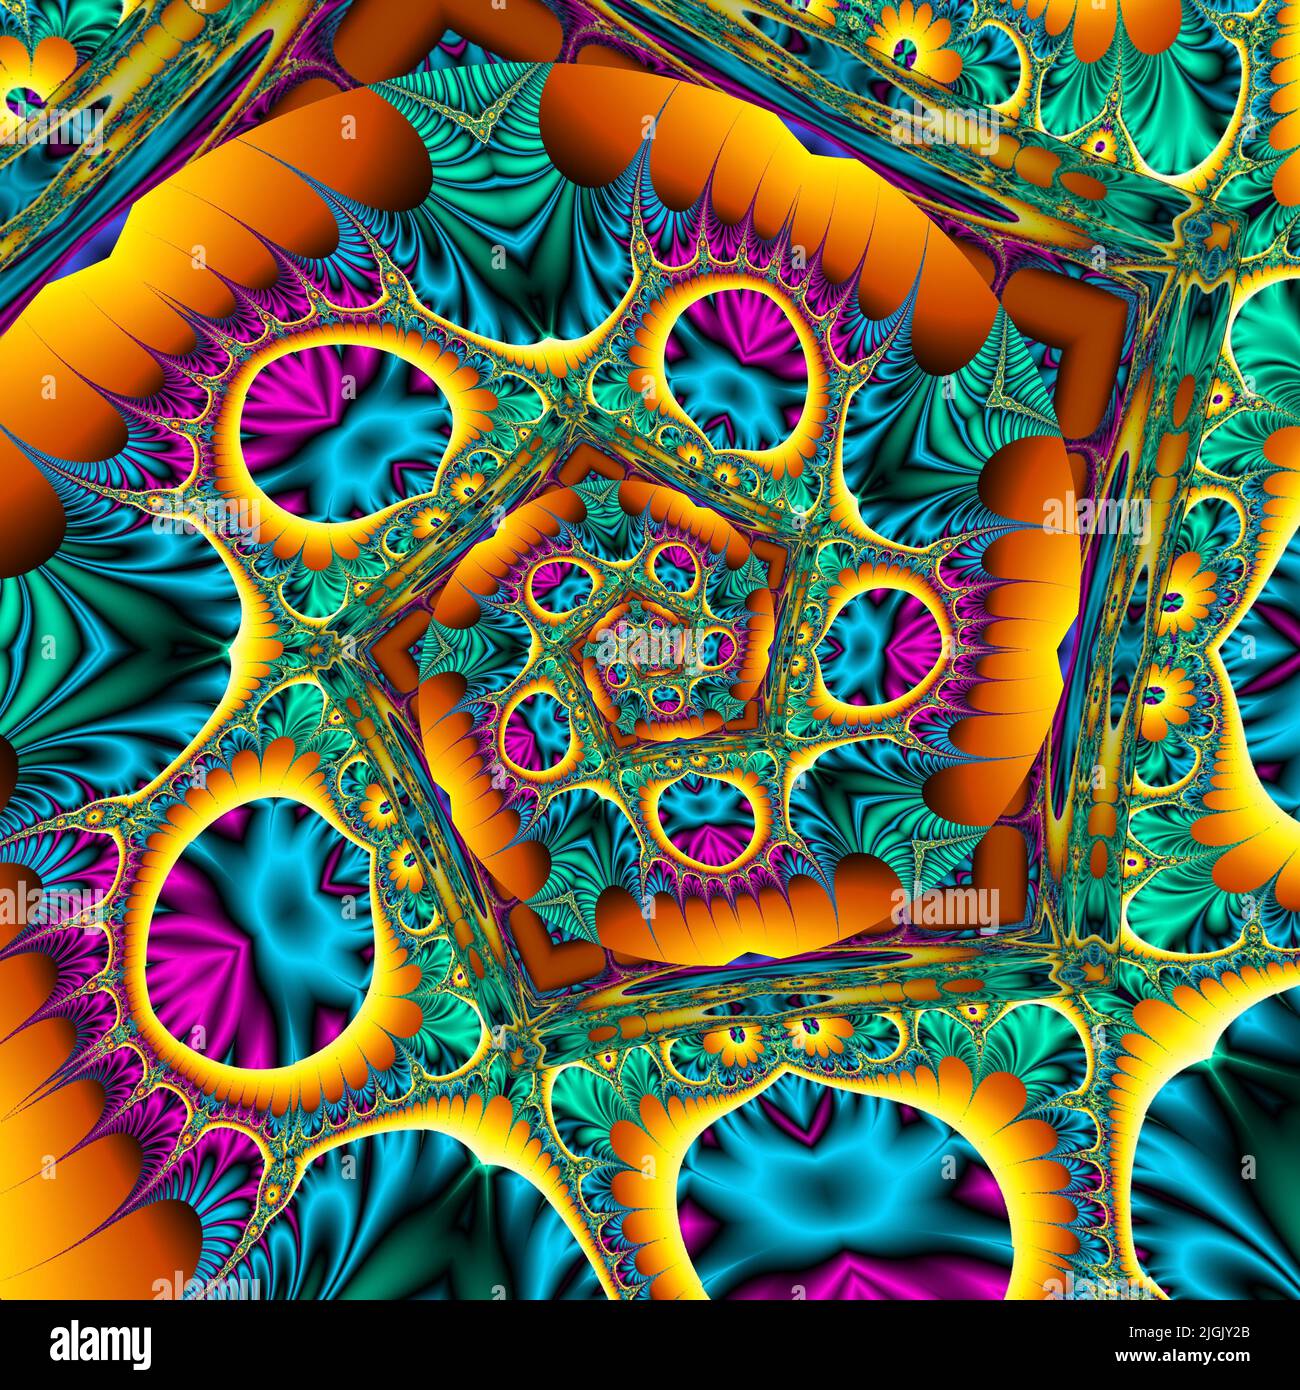 Abstract Computer generated Fractal design. A fractal is a never